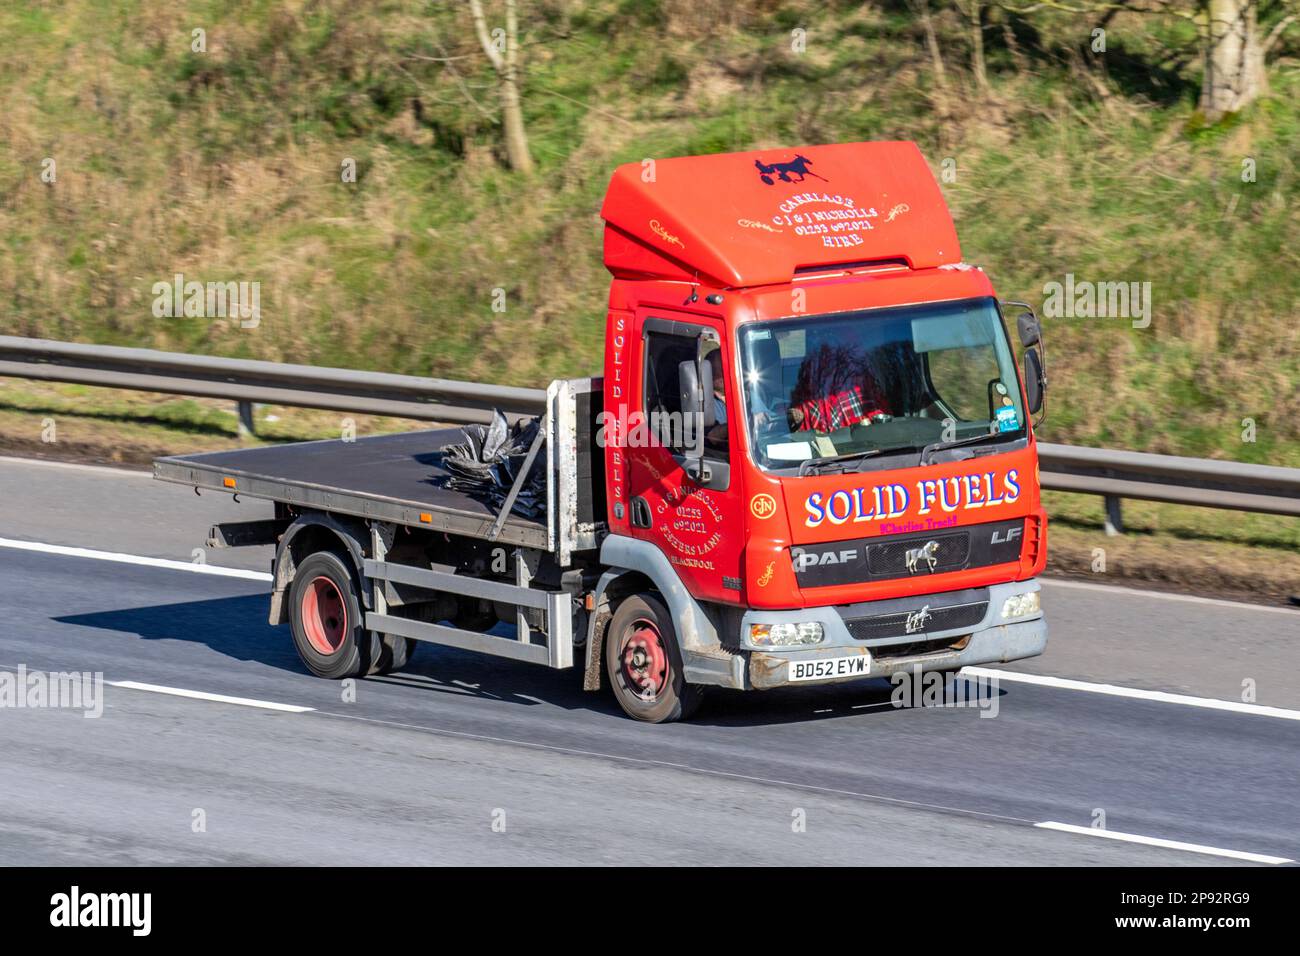 C & J NICHOLS COAL MERCHANTS, C. J. & J Nicholls provide coal and solid fuels to businesses and homes across the Fylde Coast. Solid Fuels.  2002 Red DAF LF FA LF45 150 45.150 SLP  3900cc Diesel Flatbed Truck; travelling on the M61 motorway, UK Stock Photo